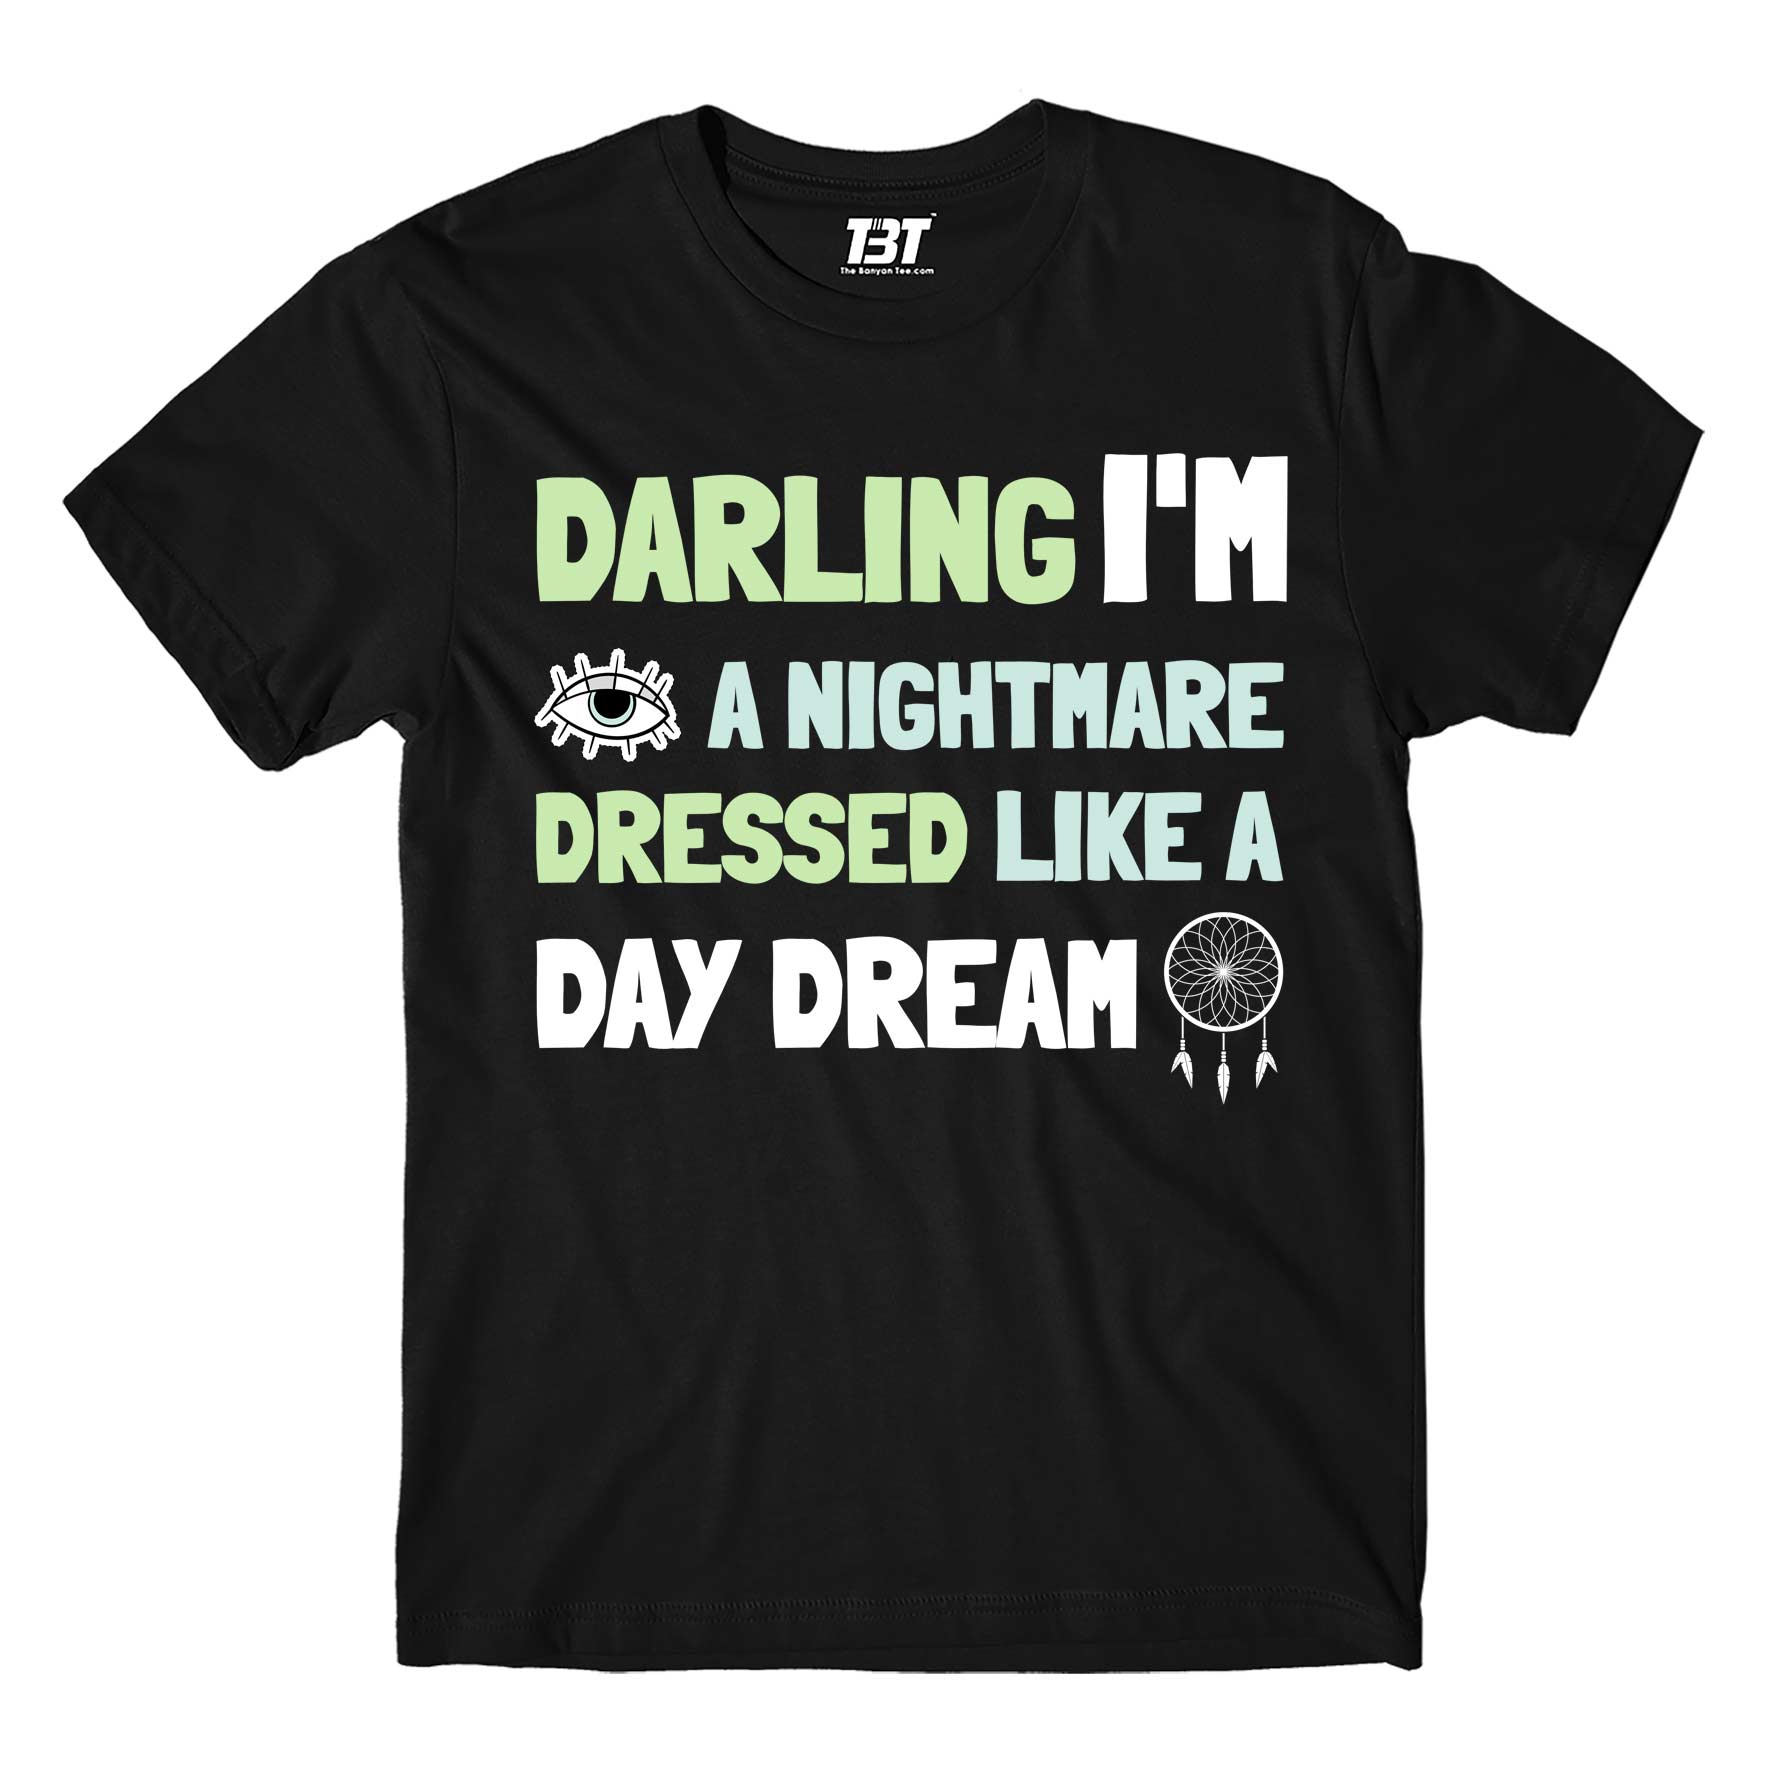 taylor swift blank space t-shirt music band buy online india the banyan tee tbt men women girls boys unisex black darling i'm a nightmare dressed like a daydream